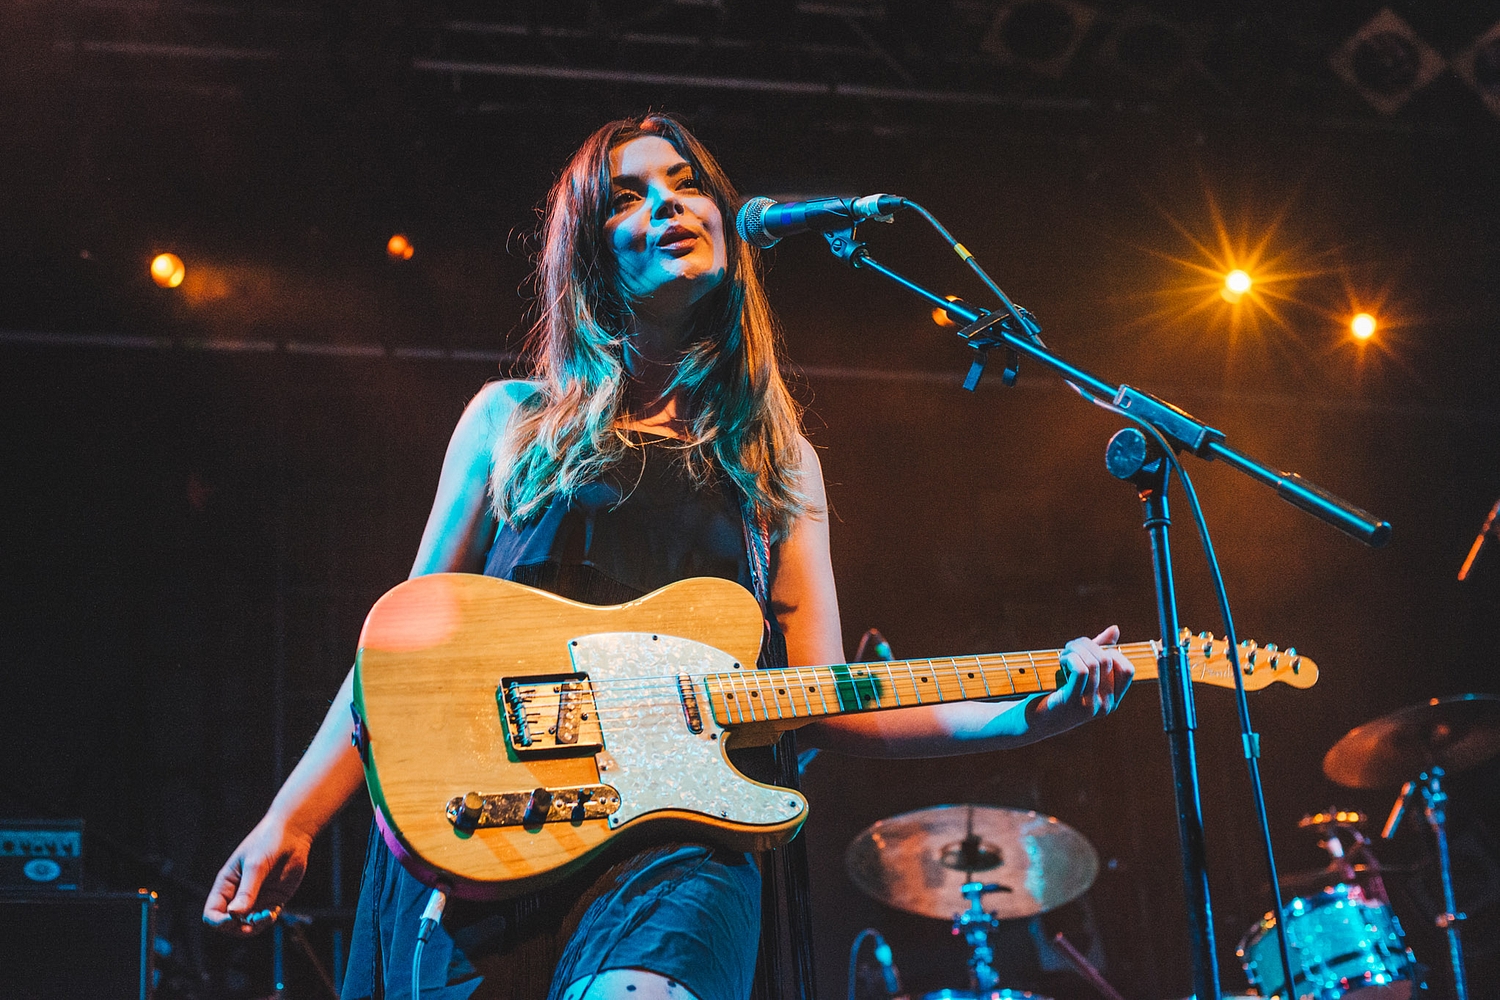 Honeyblood, Arab Strap and more are headed to Deer Shed 2017